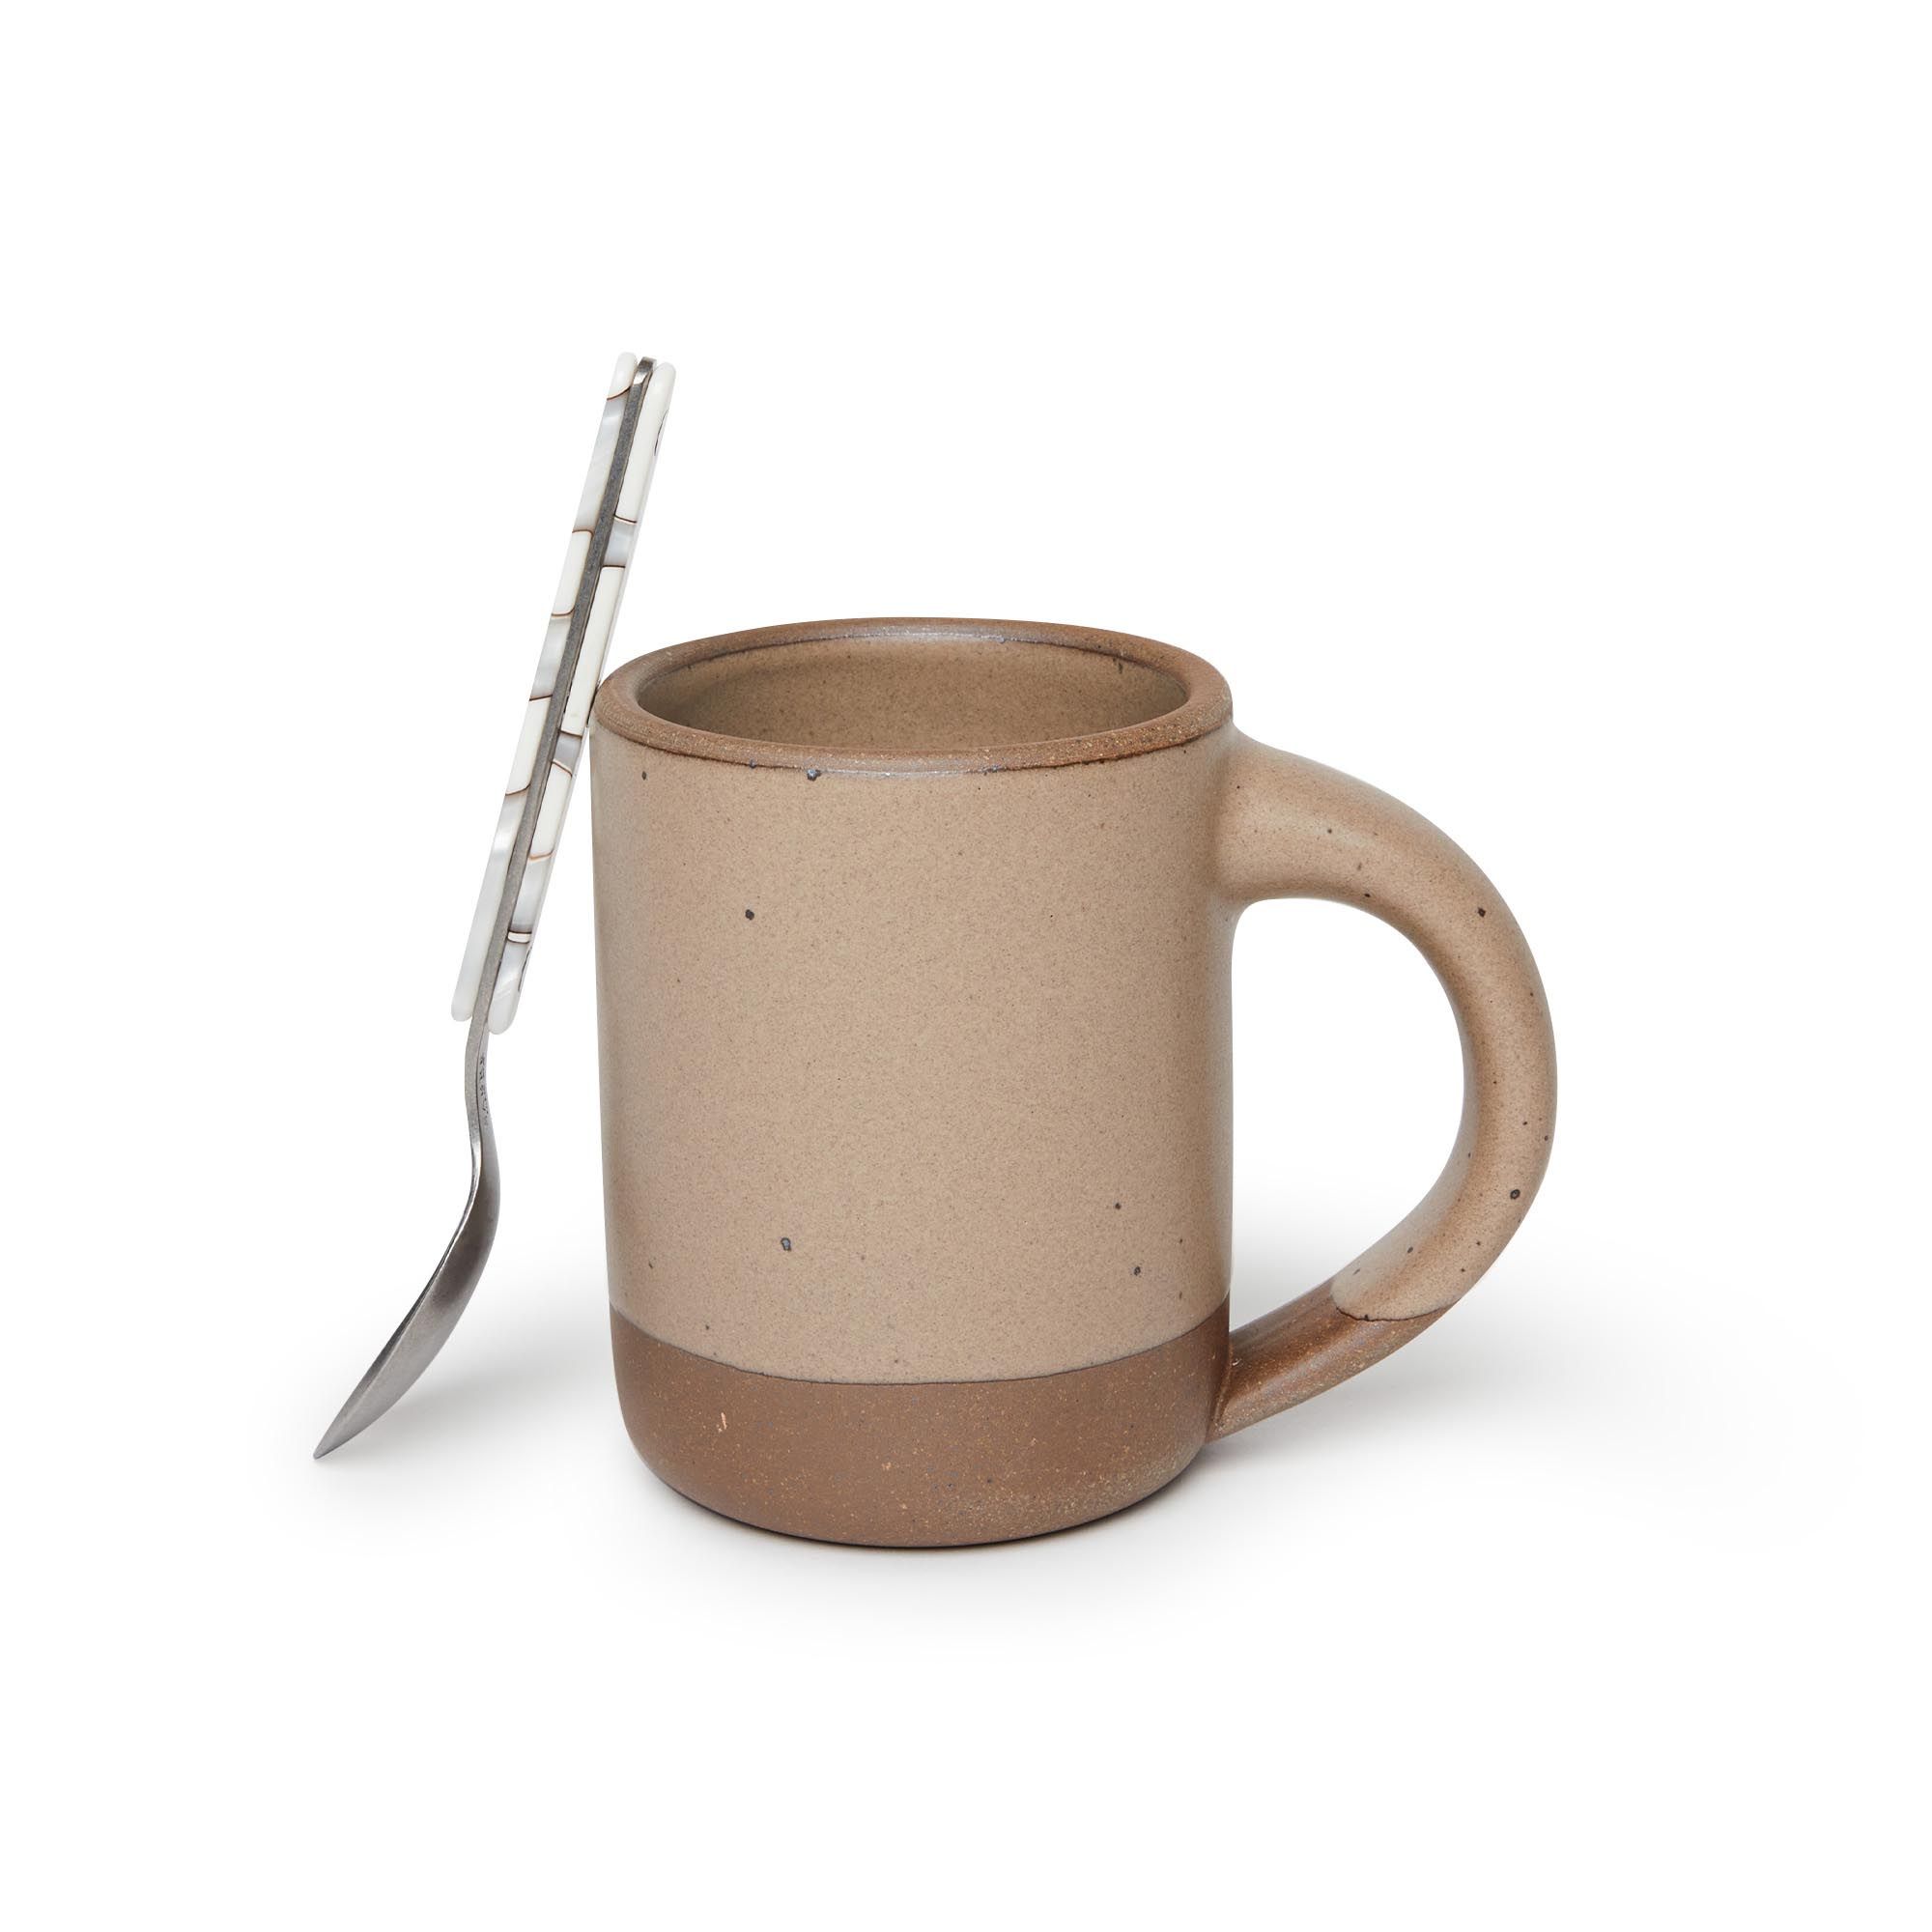 A spoon leaning on a medium sized ceramic mug with handle in a warm pale brown color featuring iron speckles and unglazed rim and bottom base.